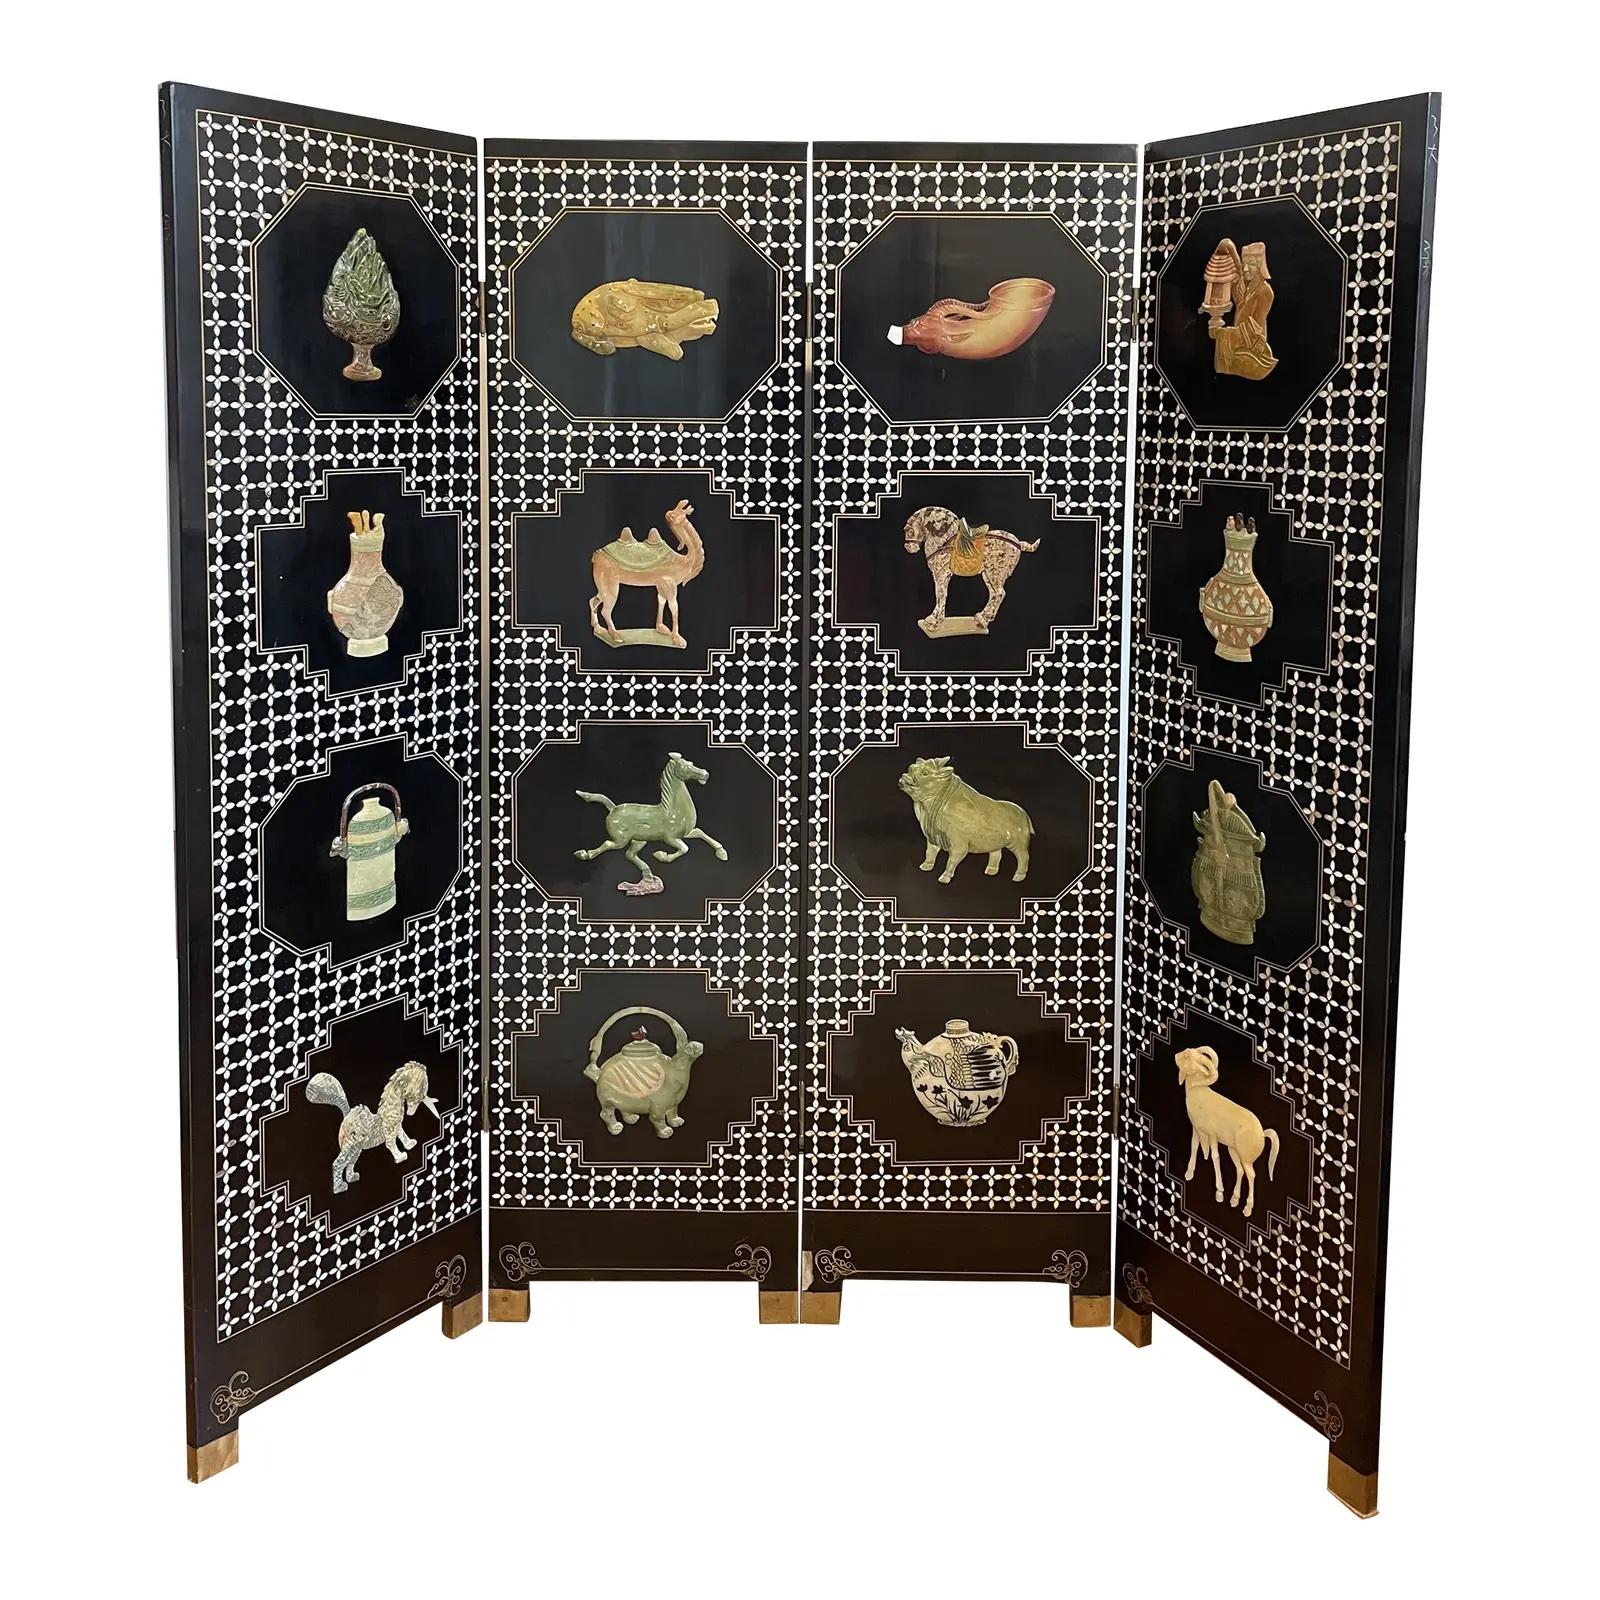 Rare Asian, four panel, free standing room divider screen featuring carved jade motifs and mother of pearl inlay. In good vintage condition, with some crazing and minor chips were the panel's folds. The dimensions are 60